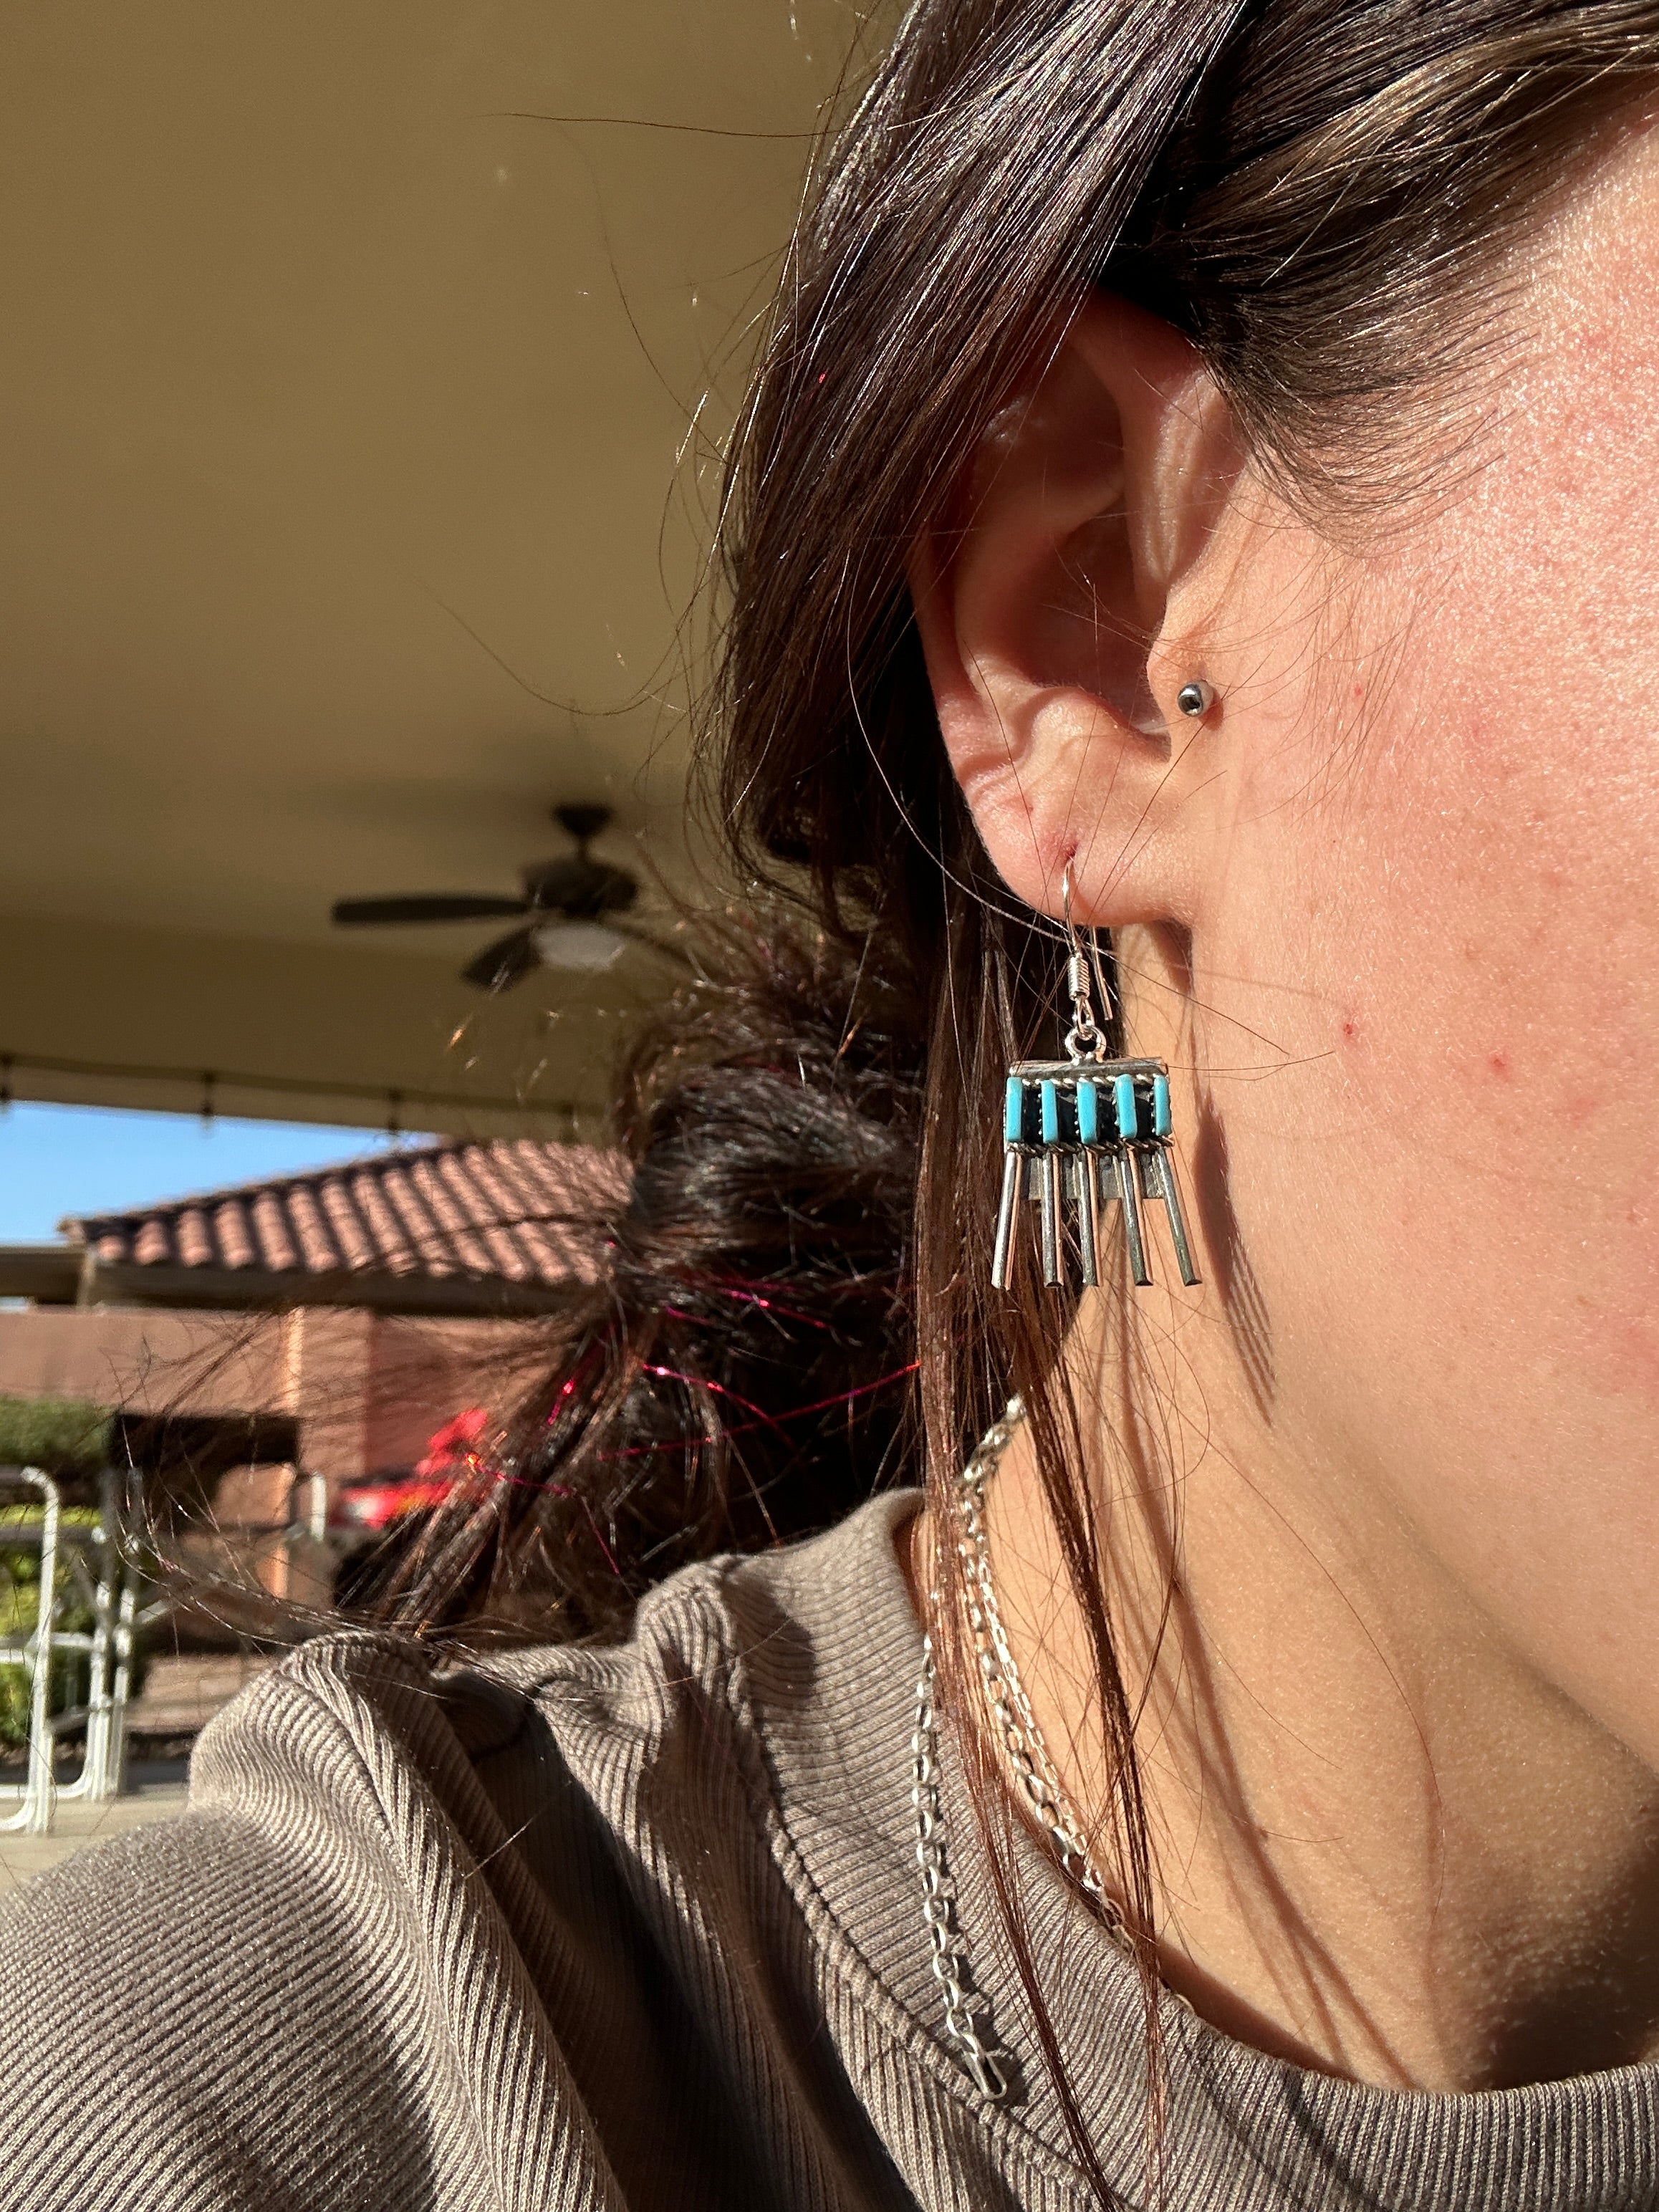 Zuni Made Turquoise & Sterling Silver Dangle Earrings